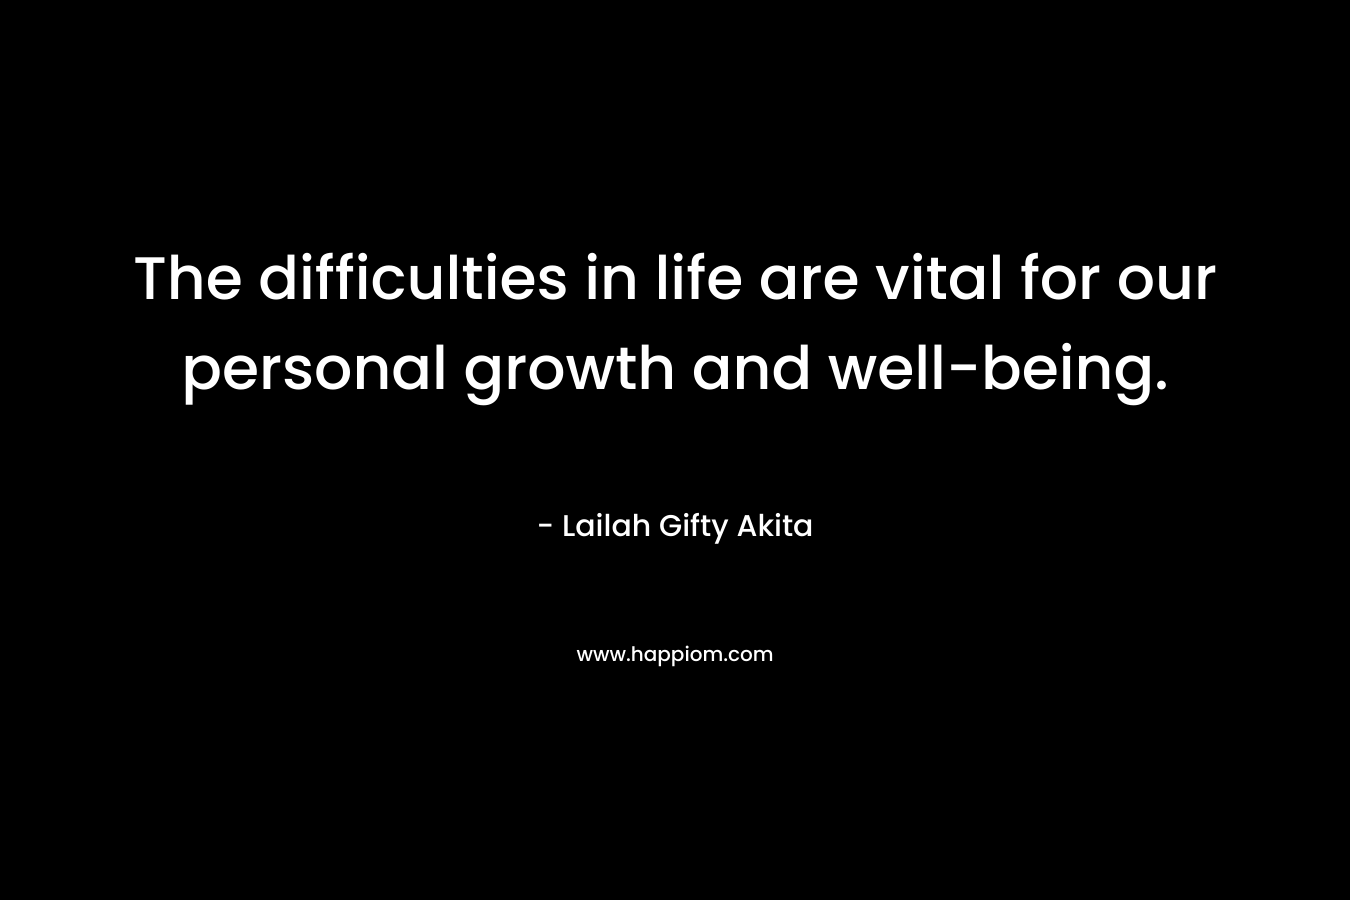 The difficulties in life are vital for our personal growth and well-being.